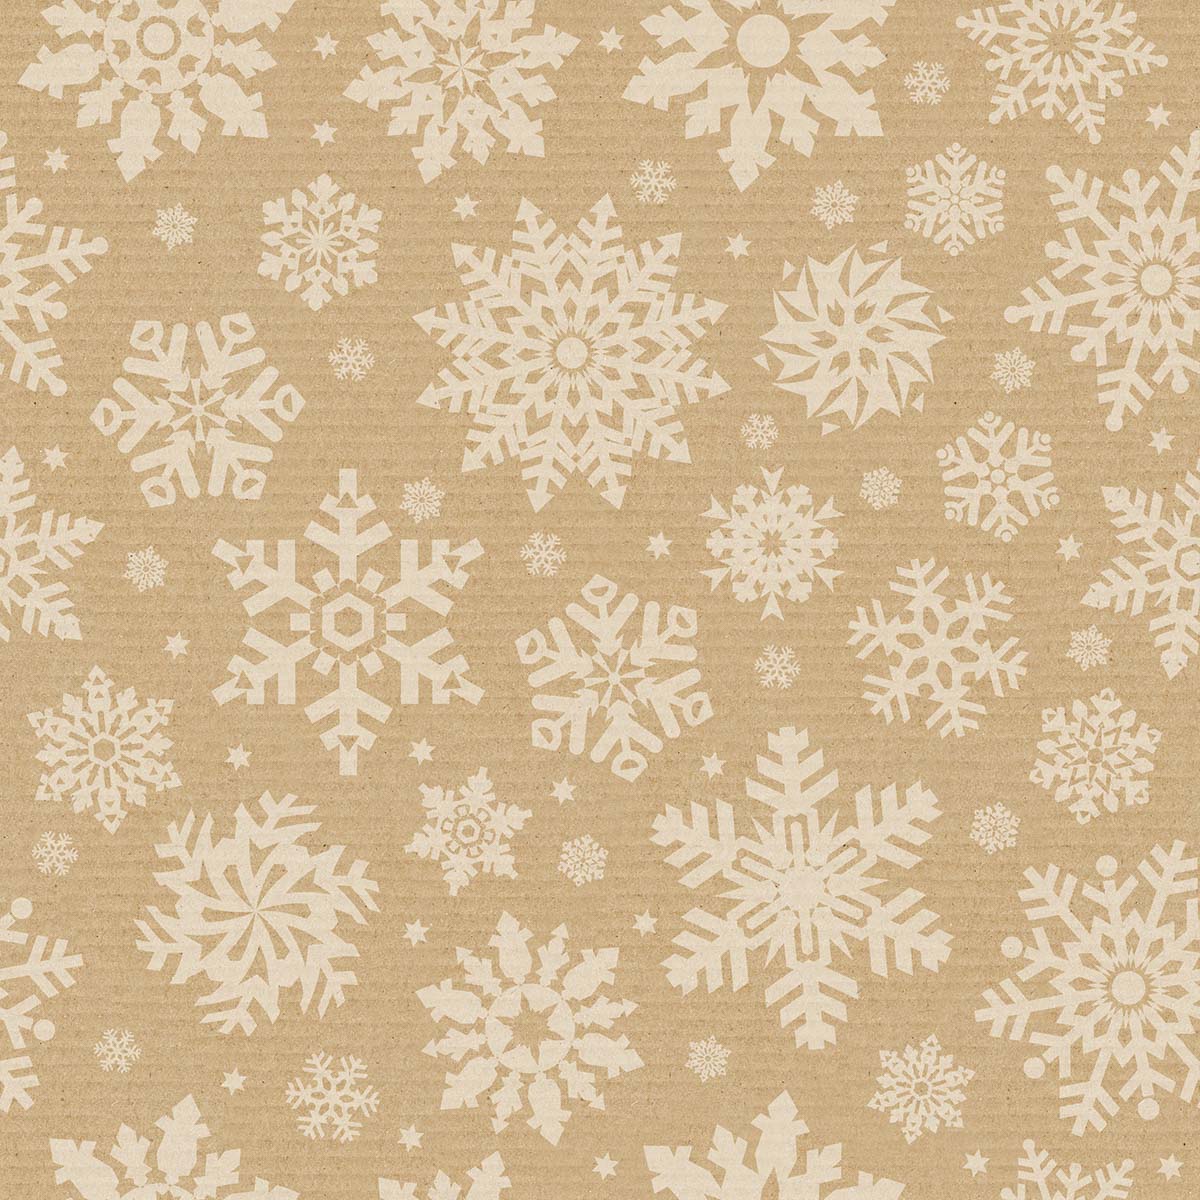 A brown cardboard with white snowflakes